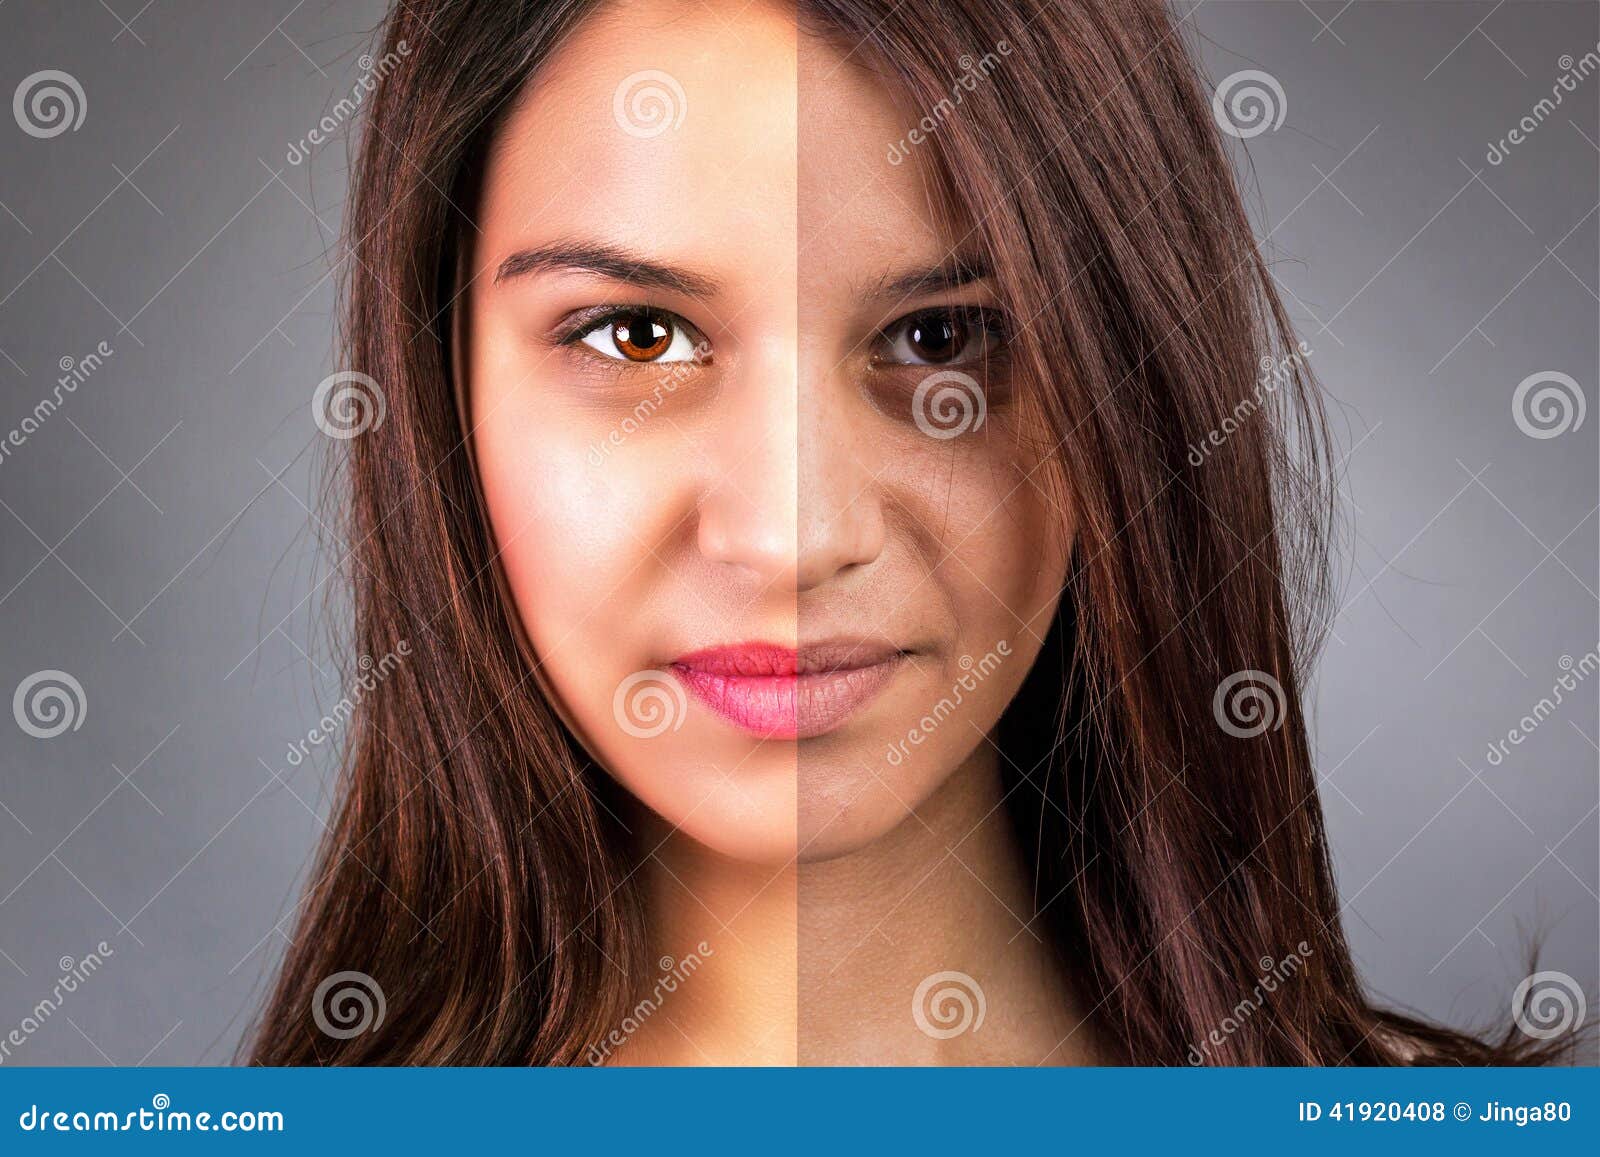 face of beautiful young woman before and after retouch